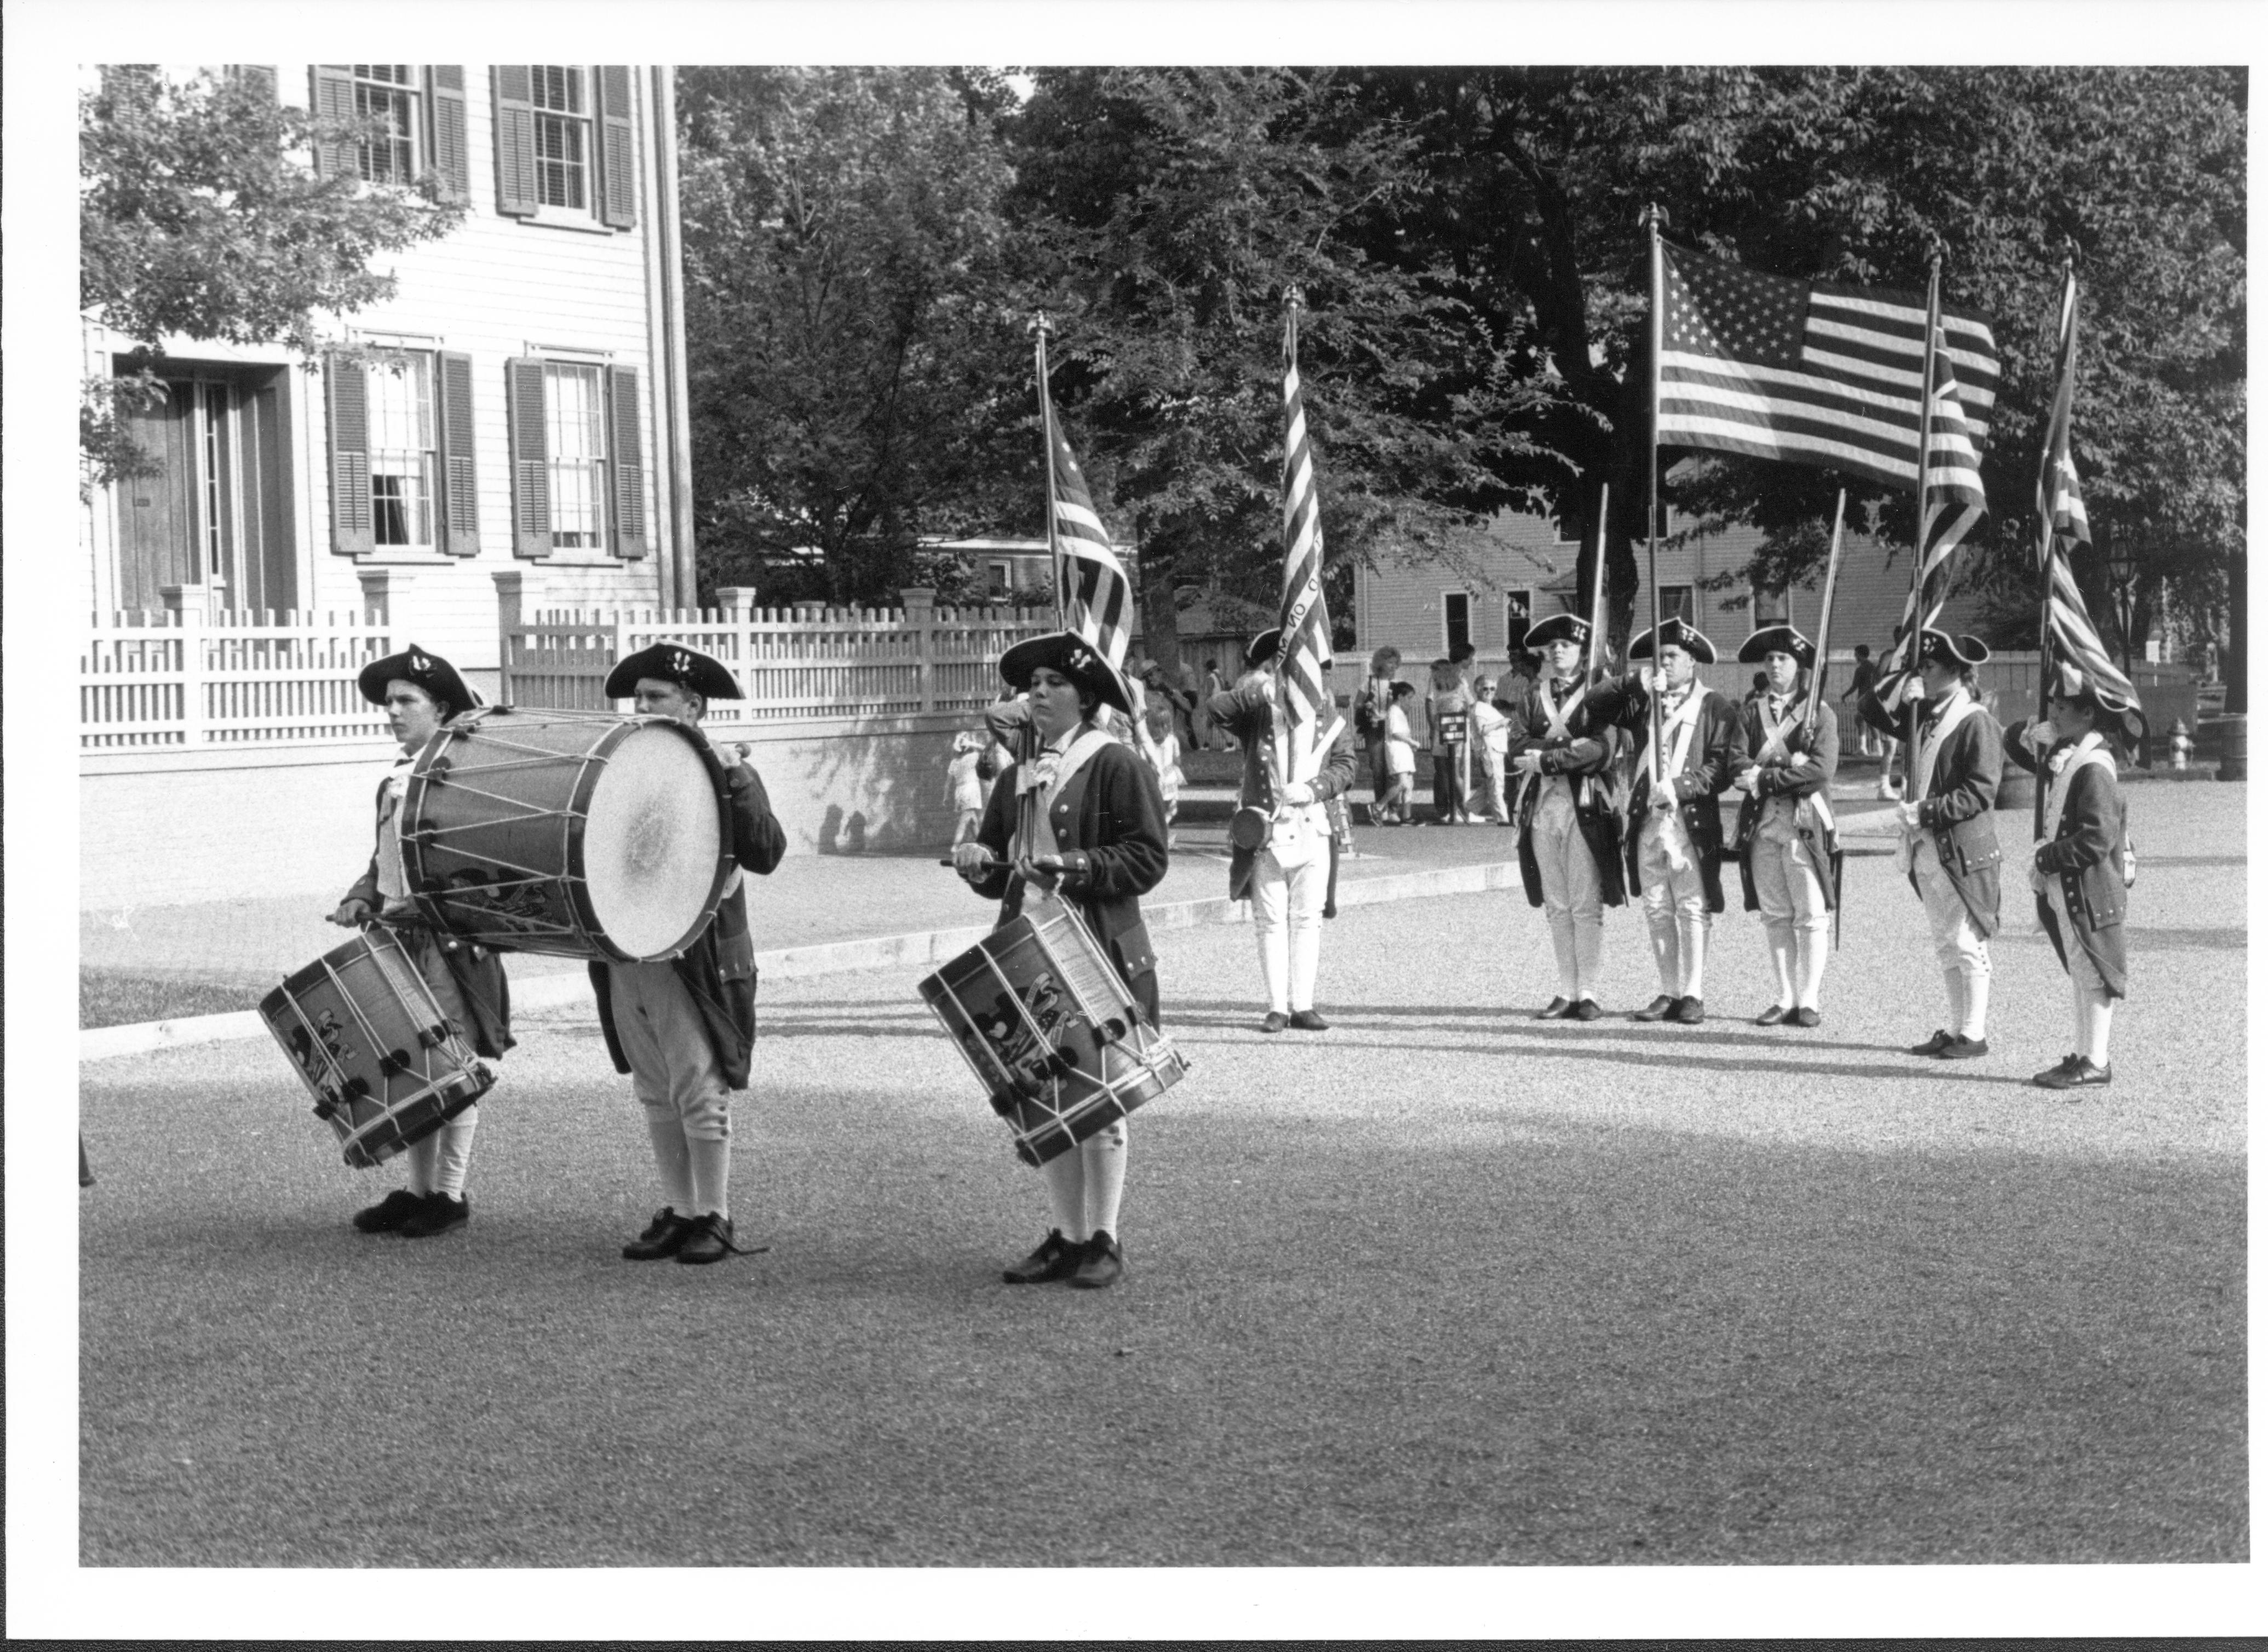 NA Lincoln Home NHS- Lincoln Festival, 90-7-3, 30 Lincoln Festival, fife and drum